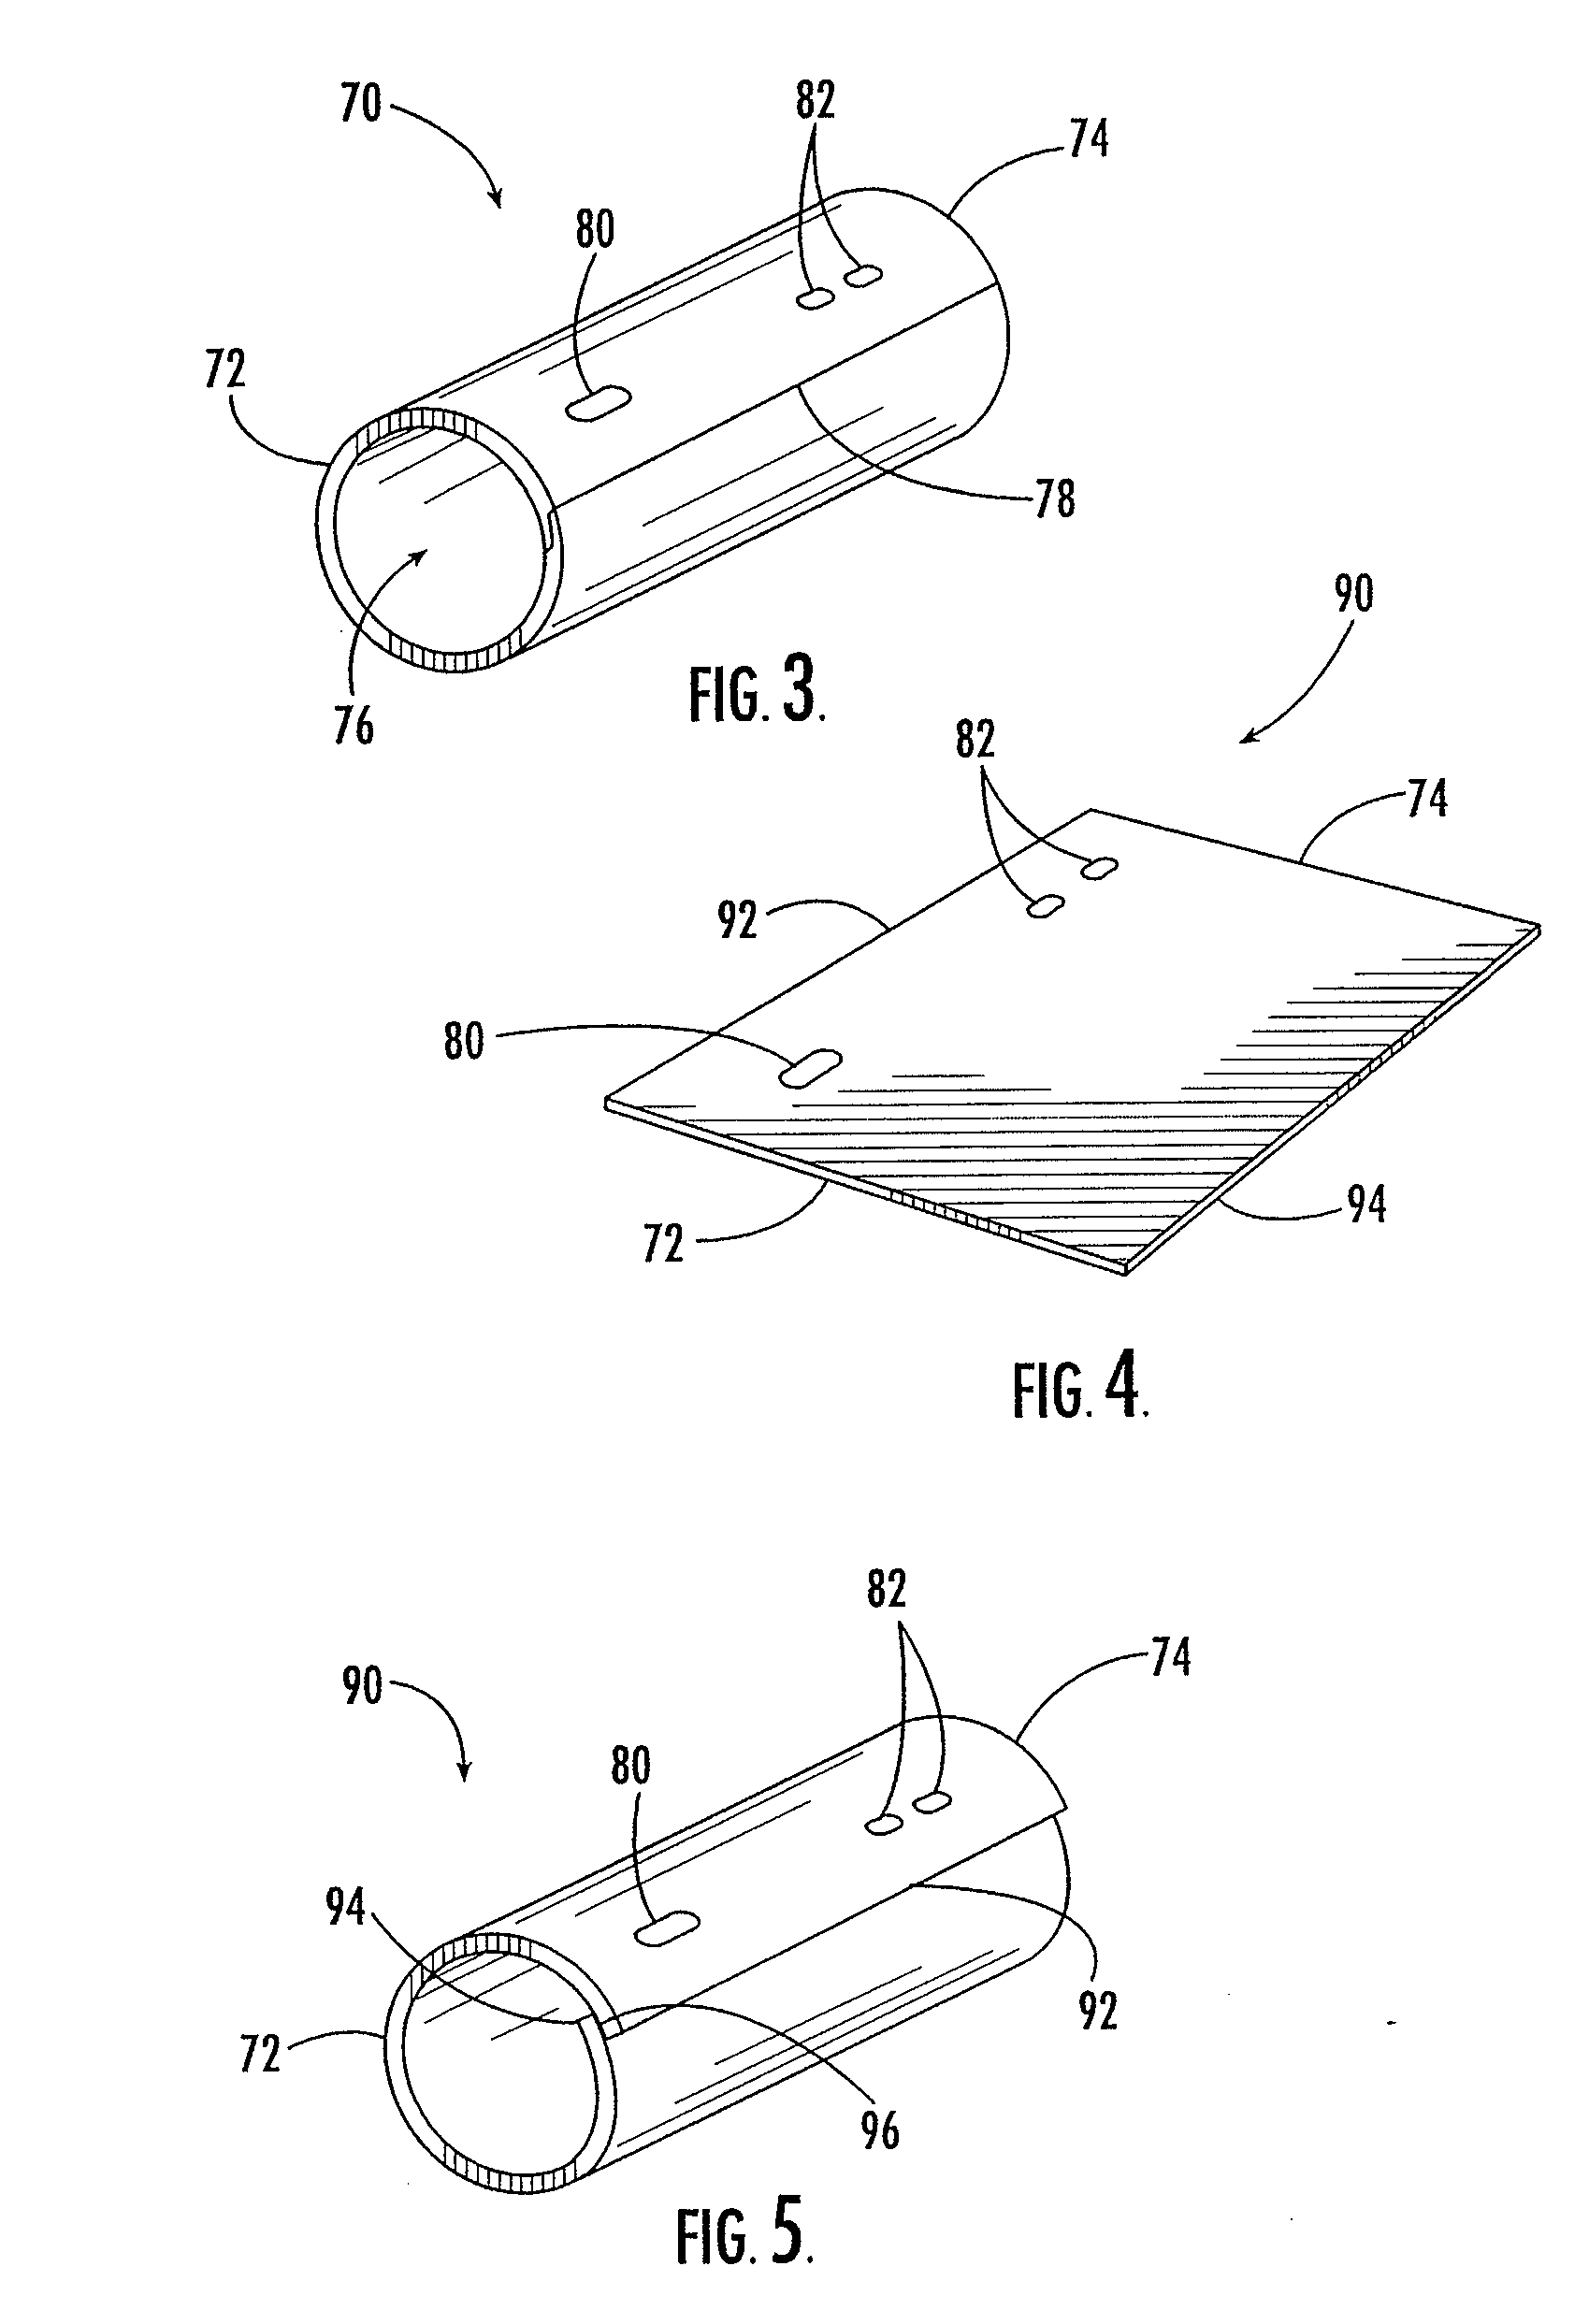 Consolidation Joining of Thermoplastic Laminate Ducts